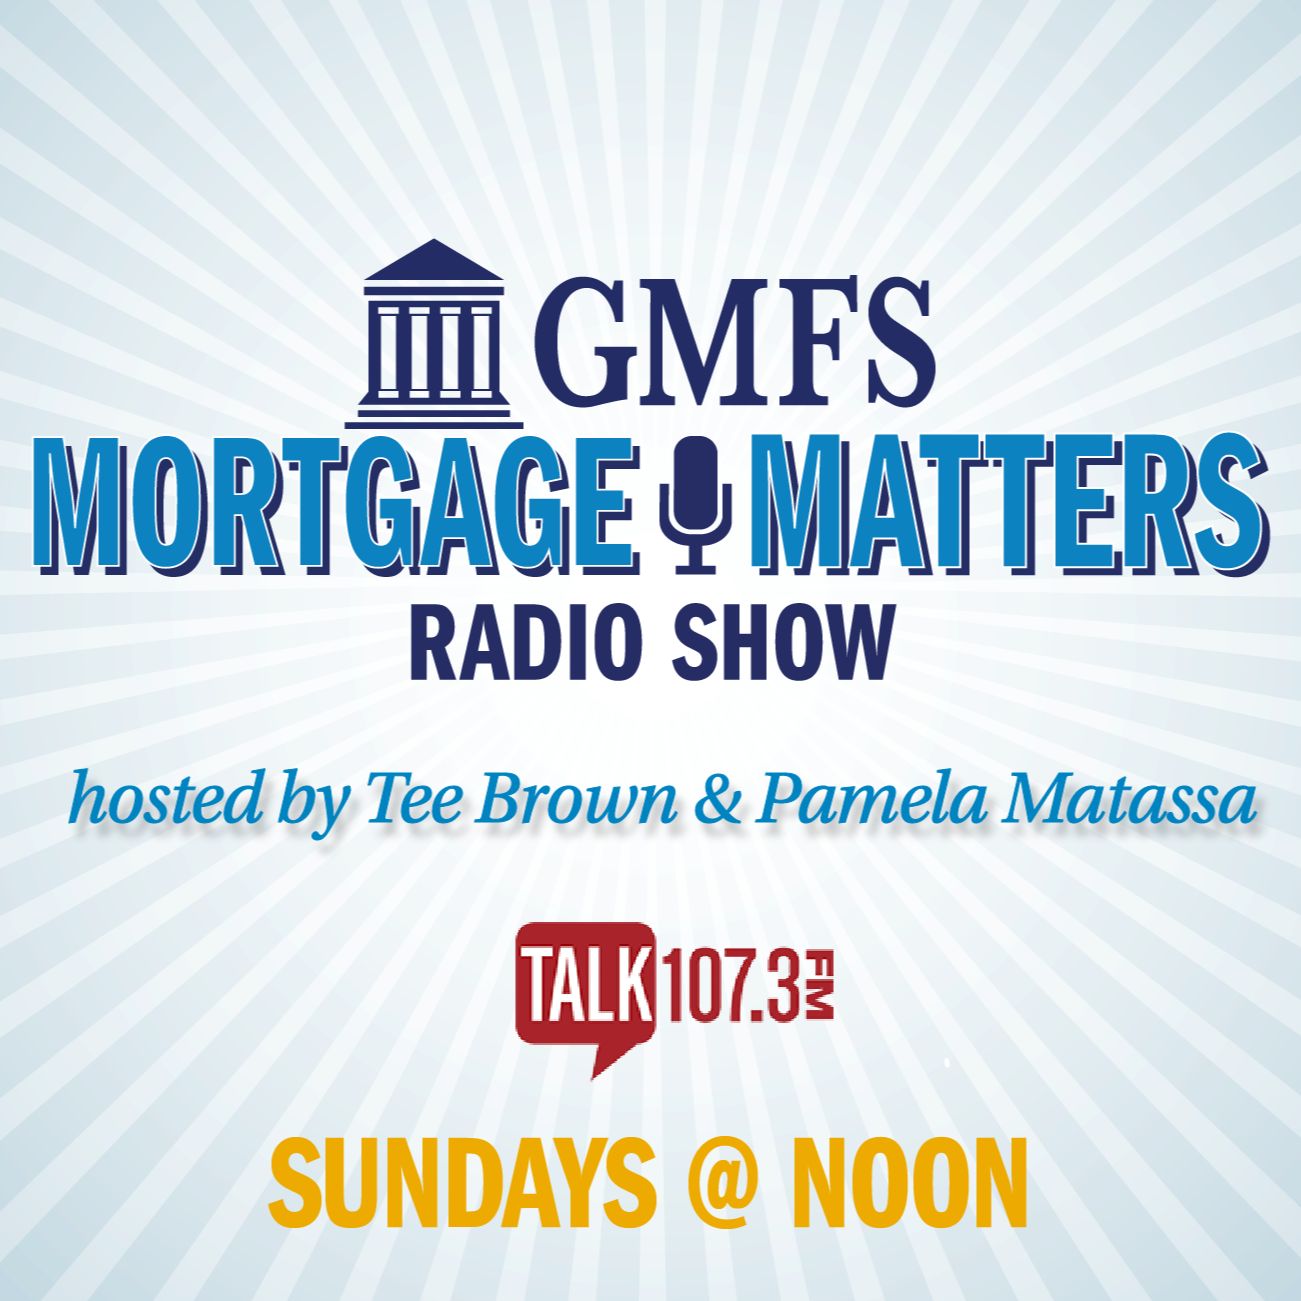 Mortgage Matters TALK 107.3 FM Sponsored by GMFS Mortgage